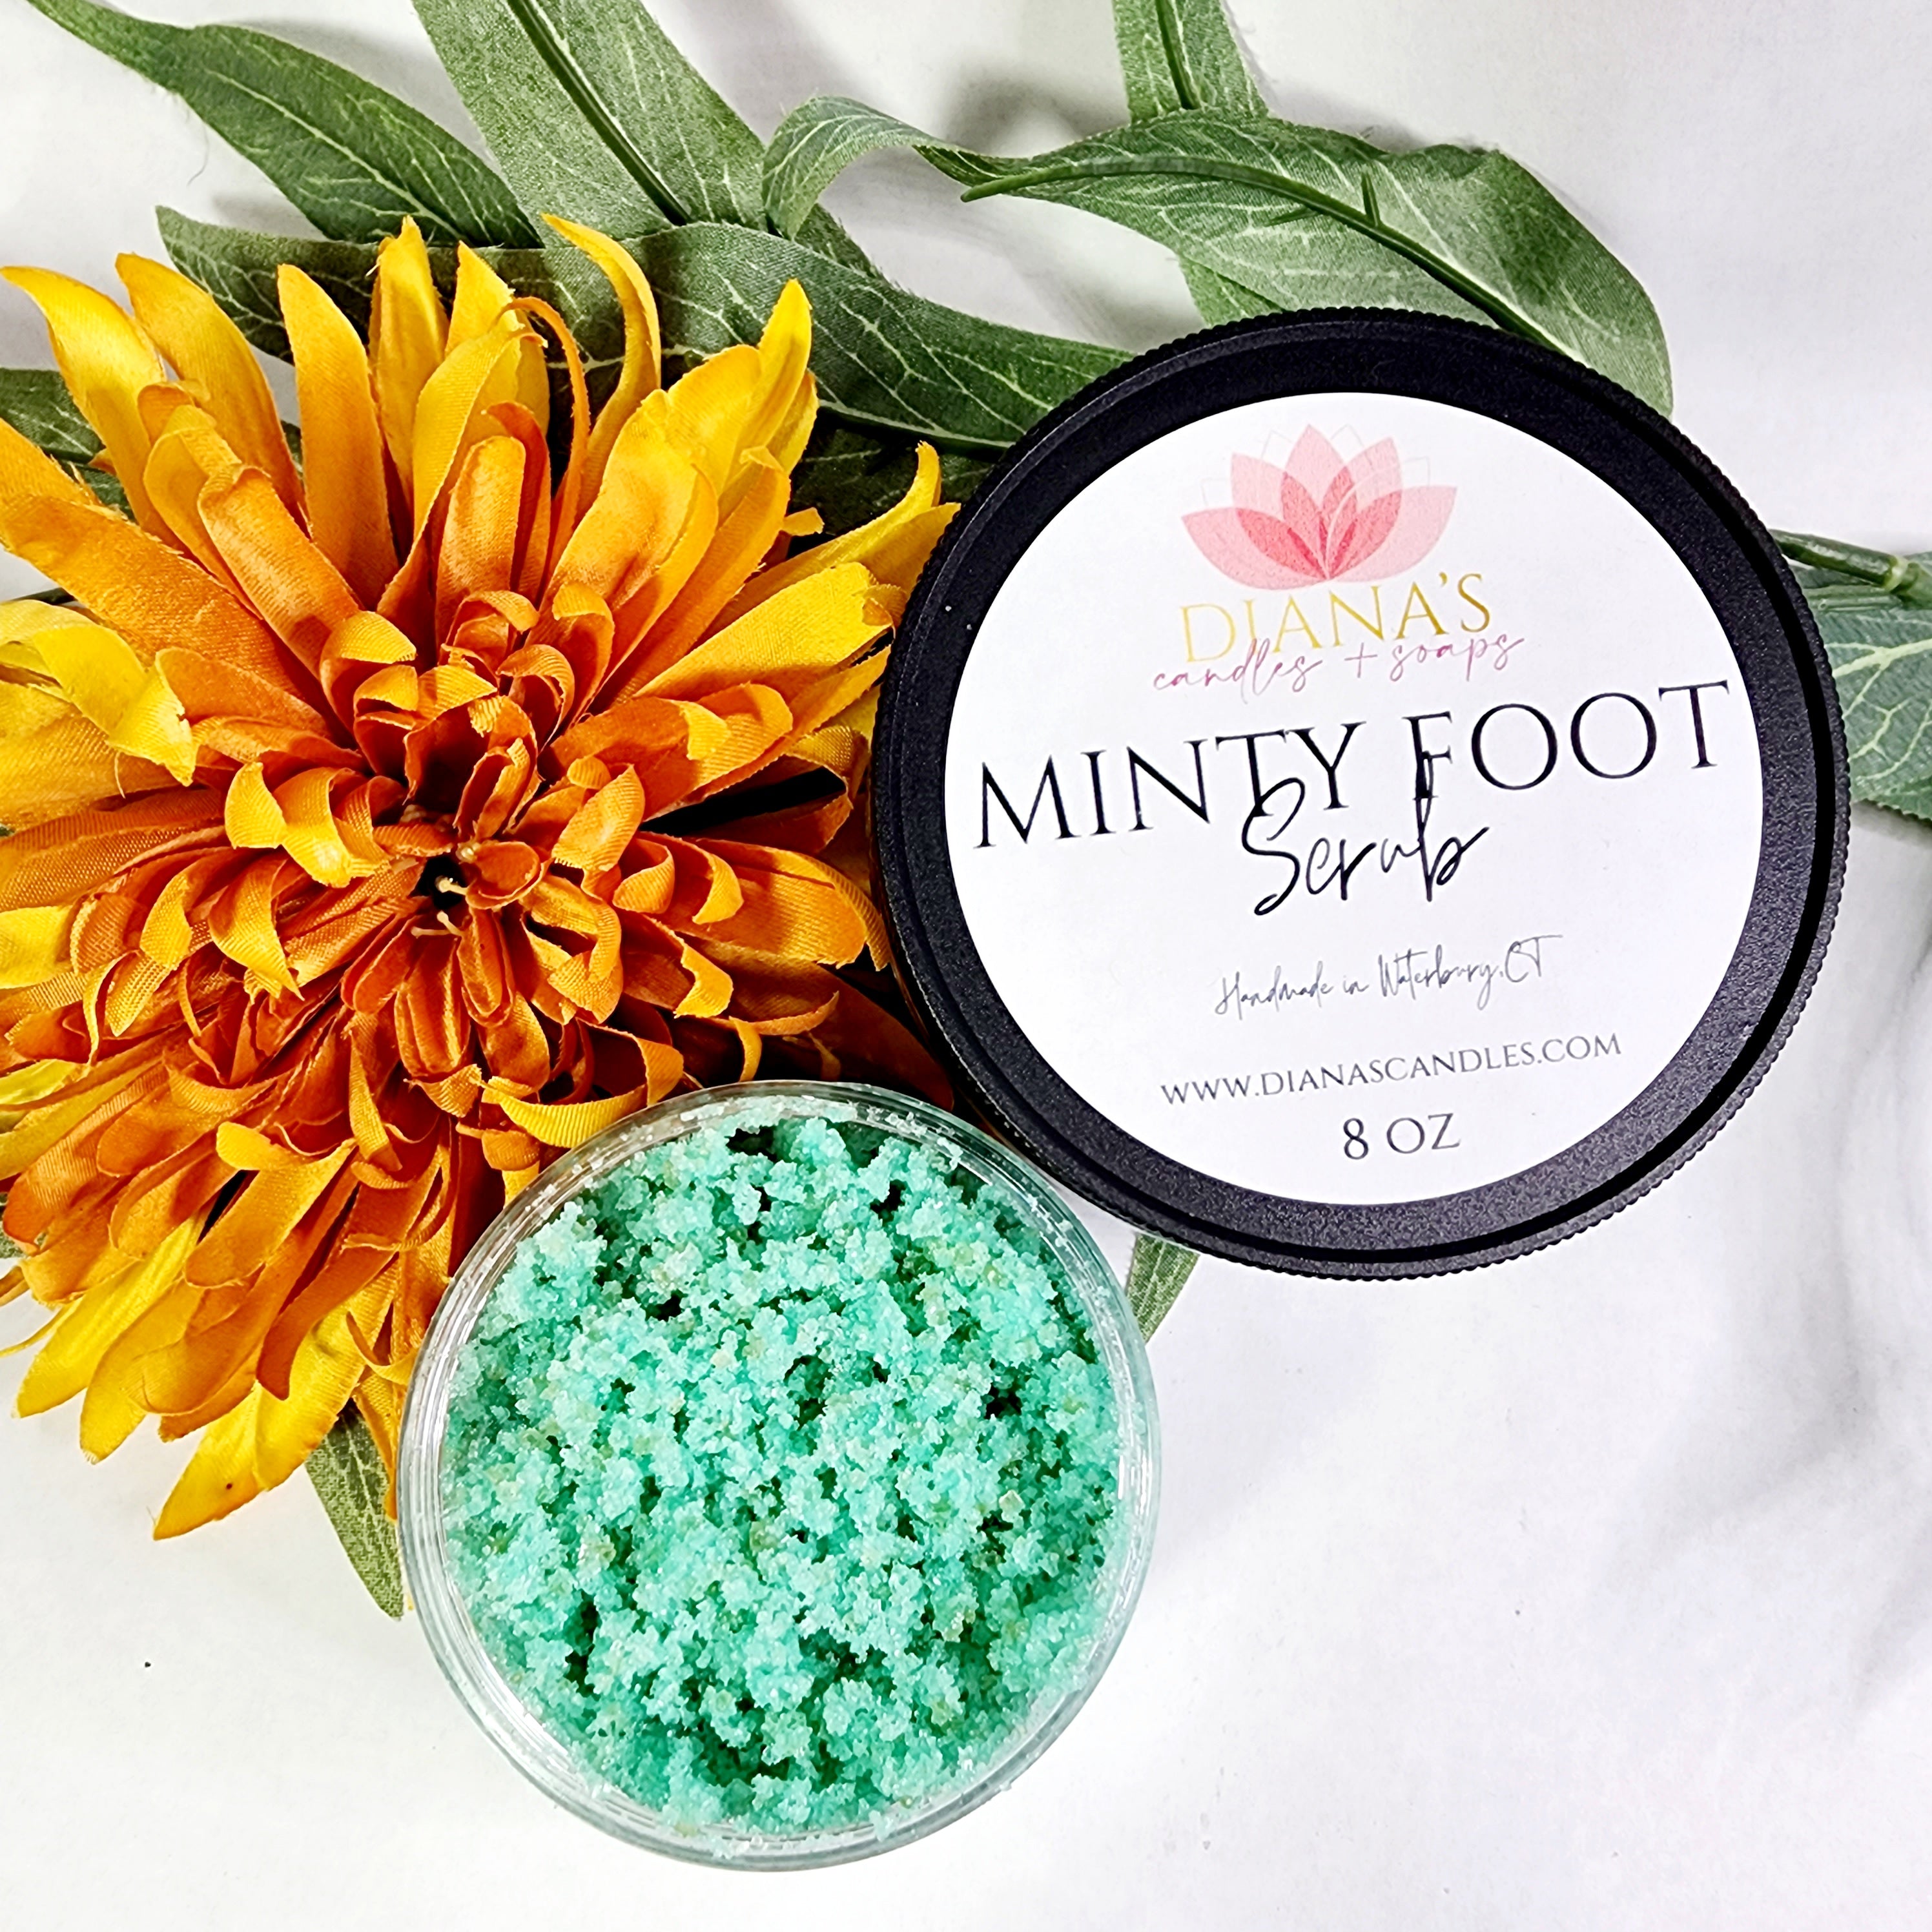 Minty Foot Scrub Diana's Candles and Soaps 